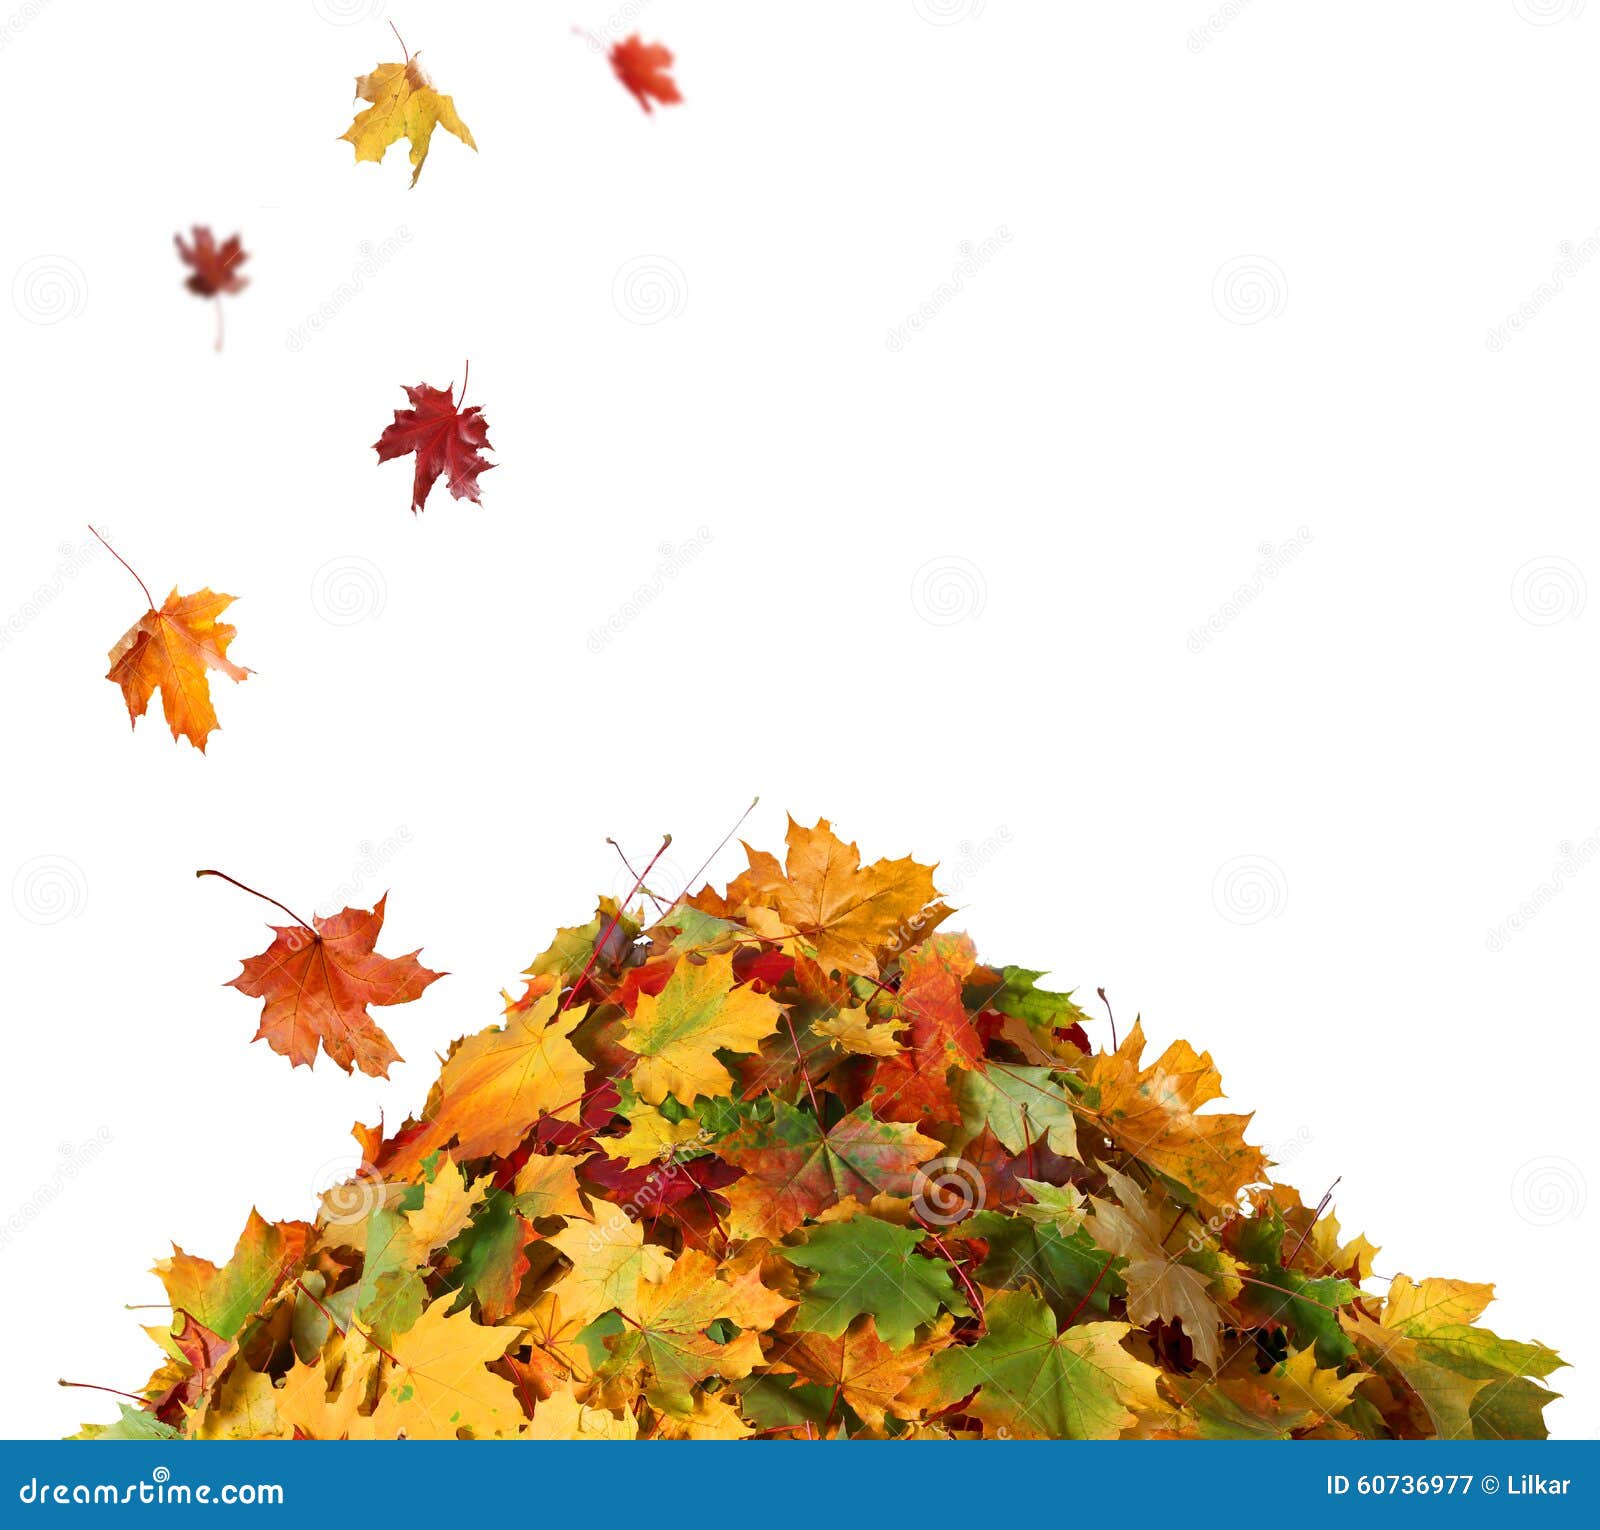 Pile of Fall Leaves stock image. Image of foliage, clean ...